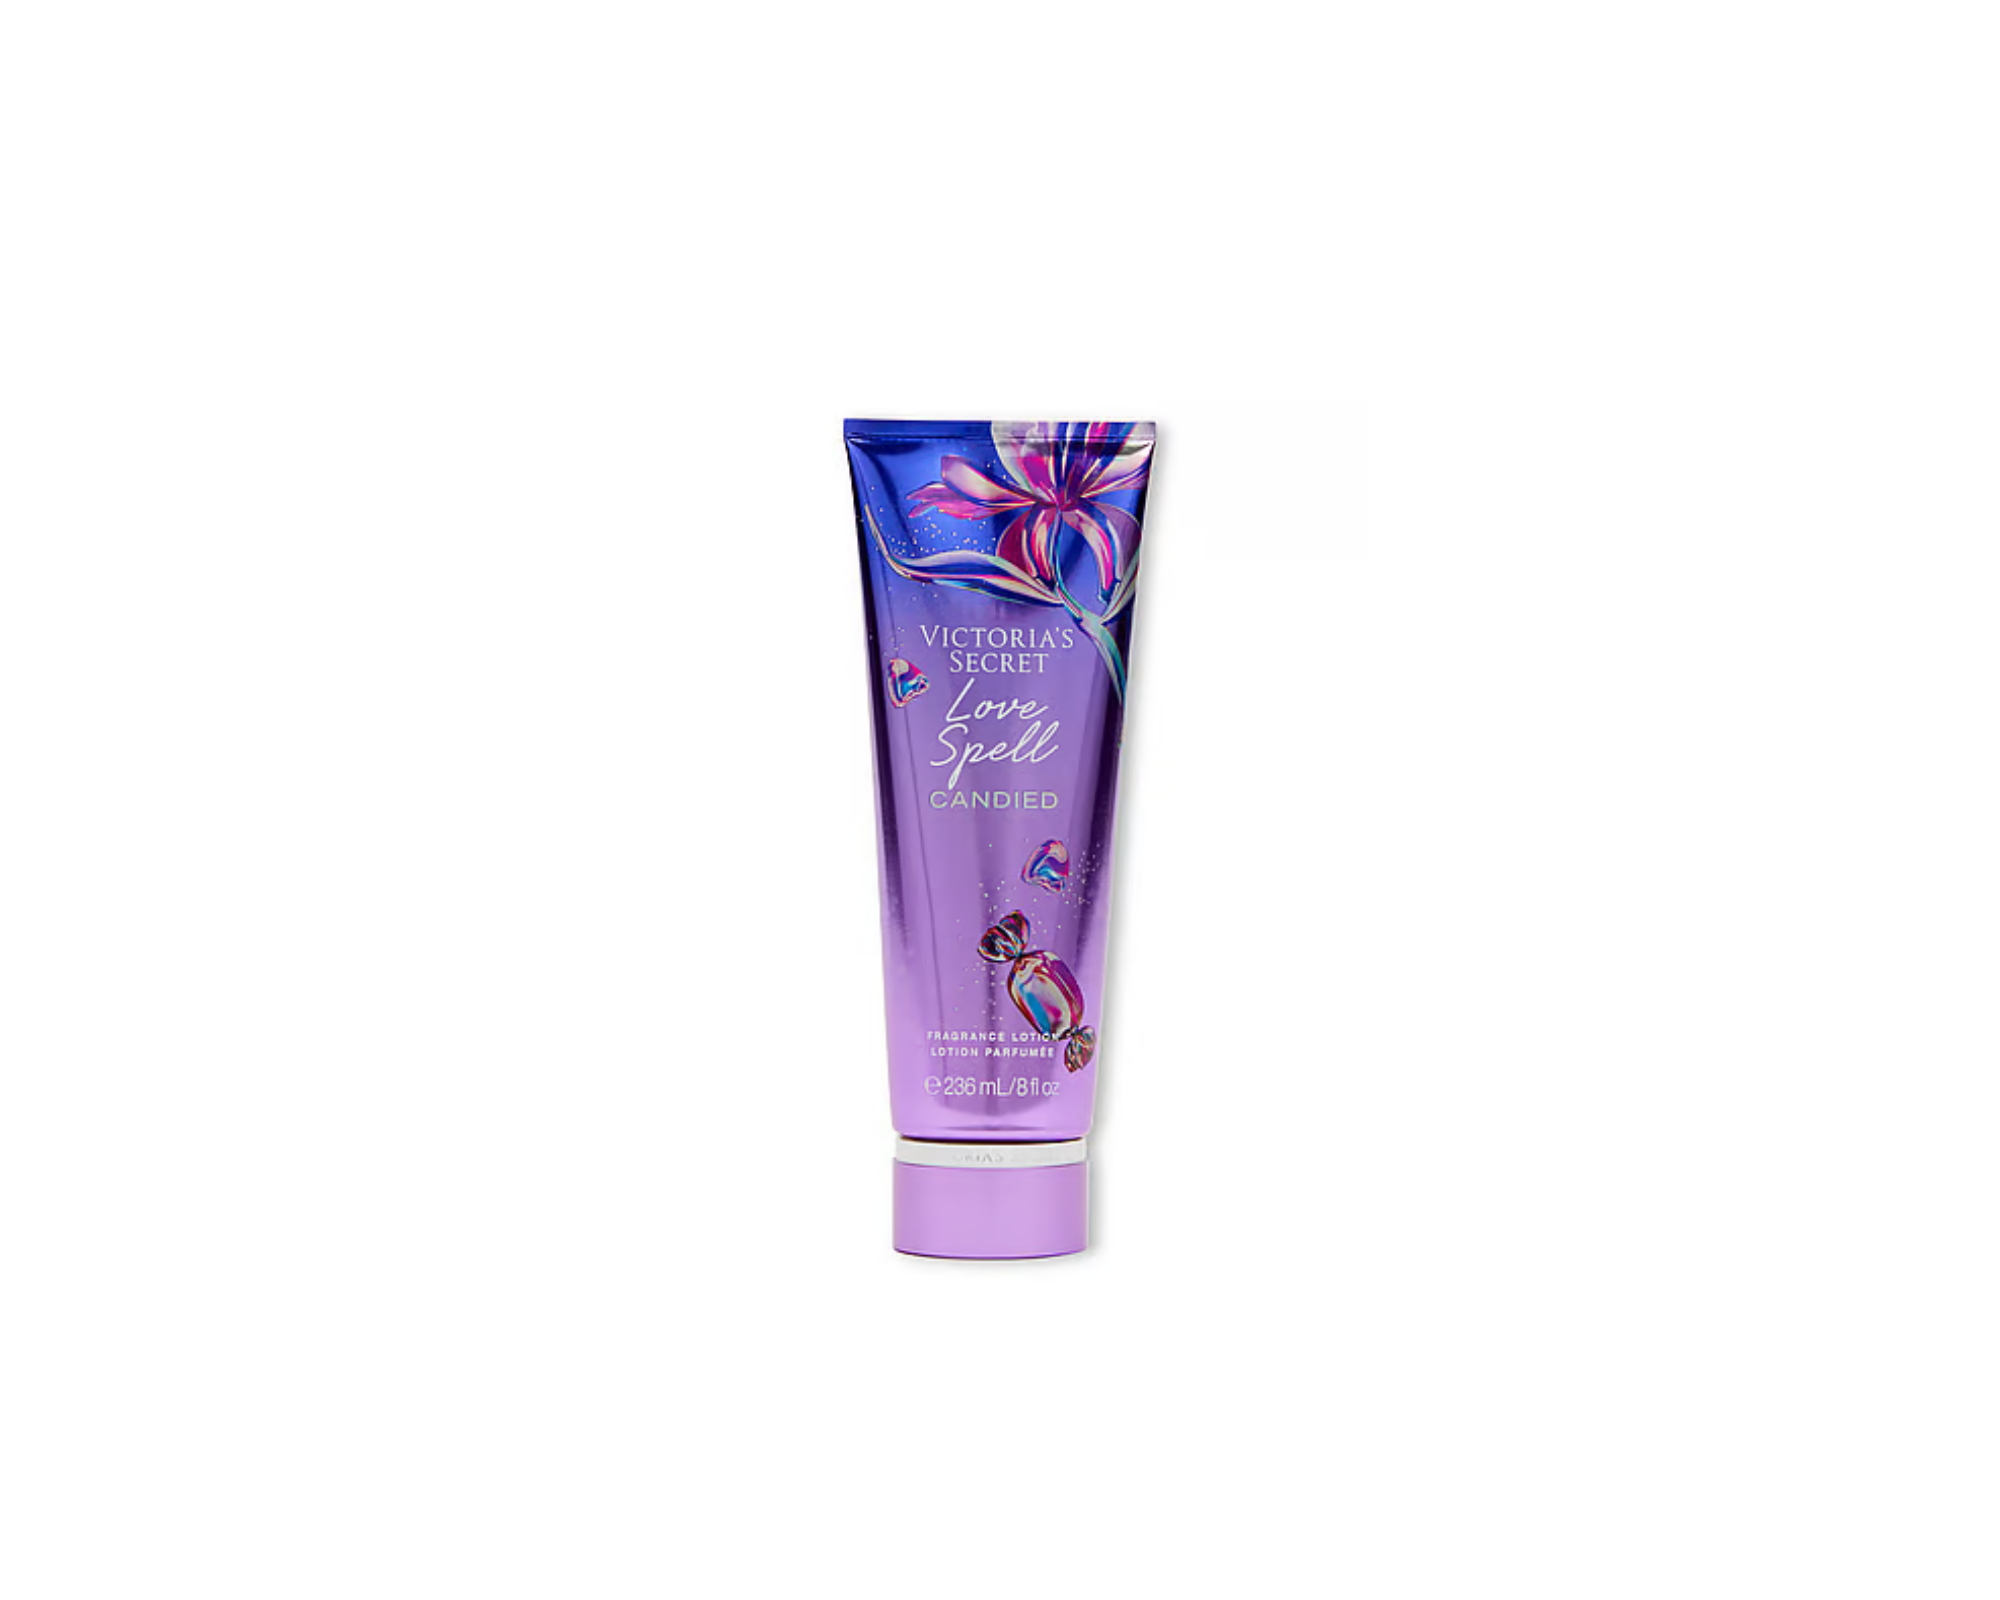 Victoria's Secret Candied Love Spell Body Lotion 236ml